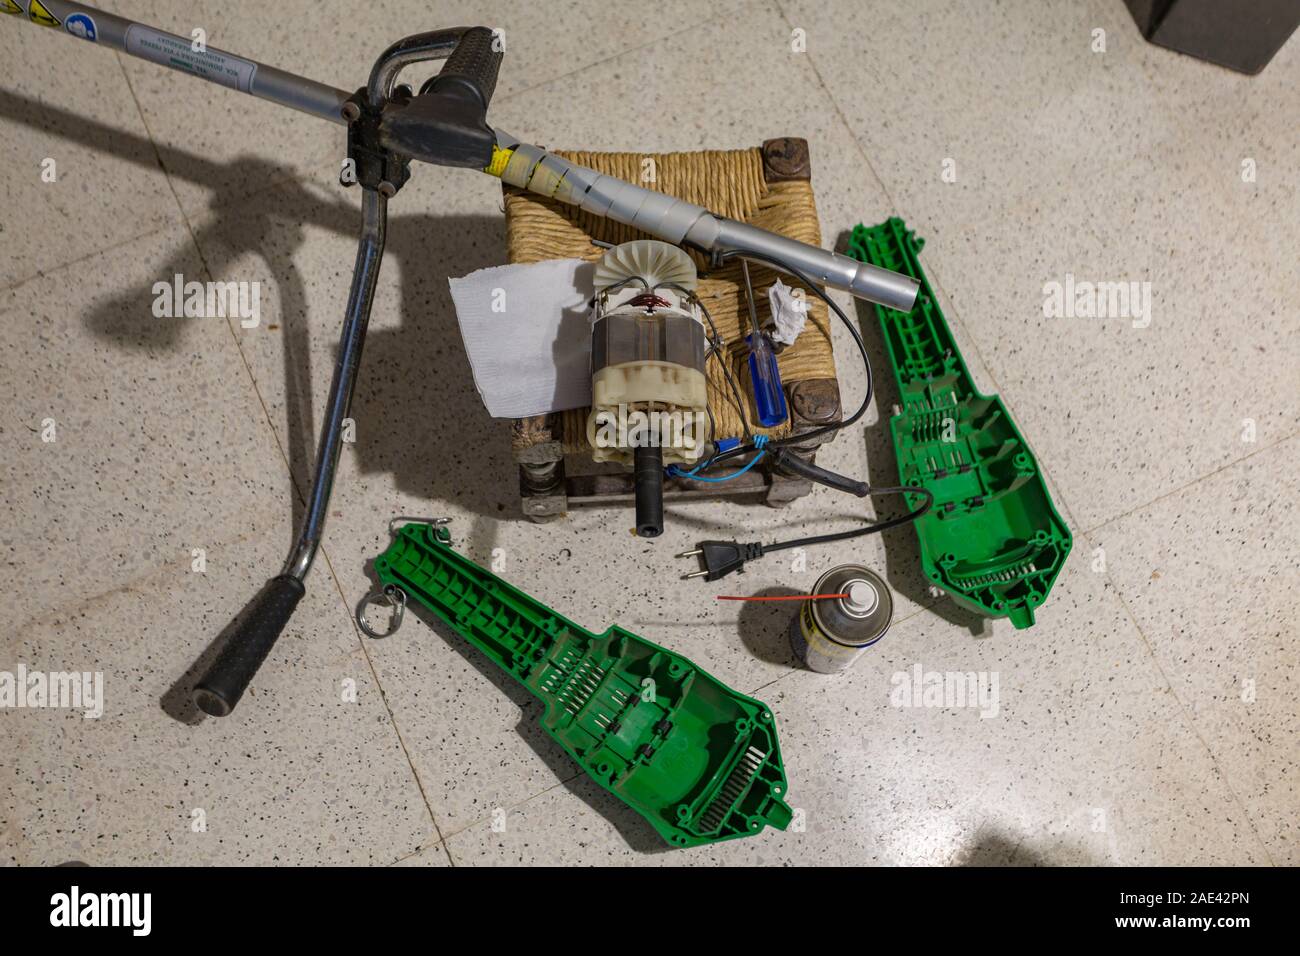 Lawn edge string trimmer repair, disassembly, view of its interior electric  motor Stock Photo - Alamy